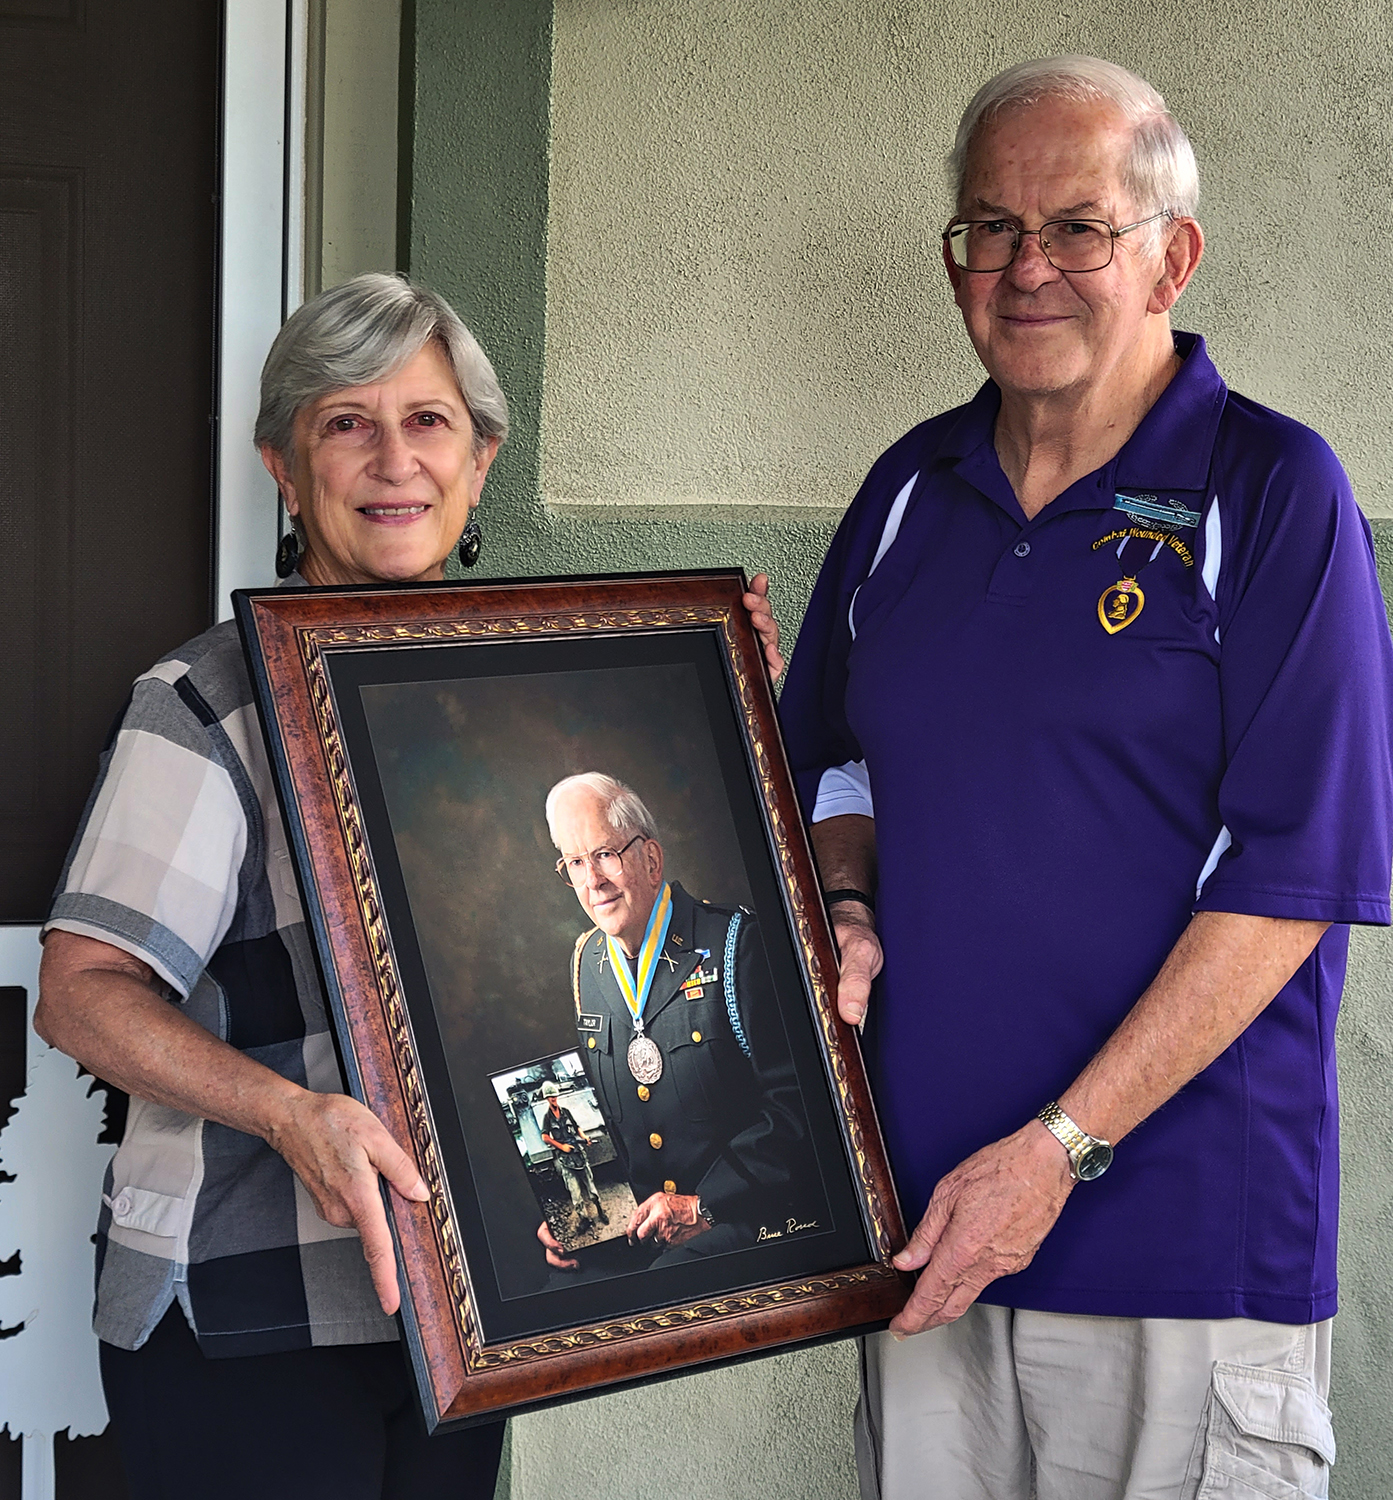 Vision of Vets Presents Capt. Charles Taylor with Portrait